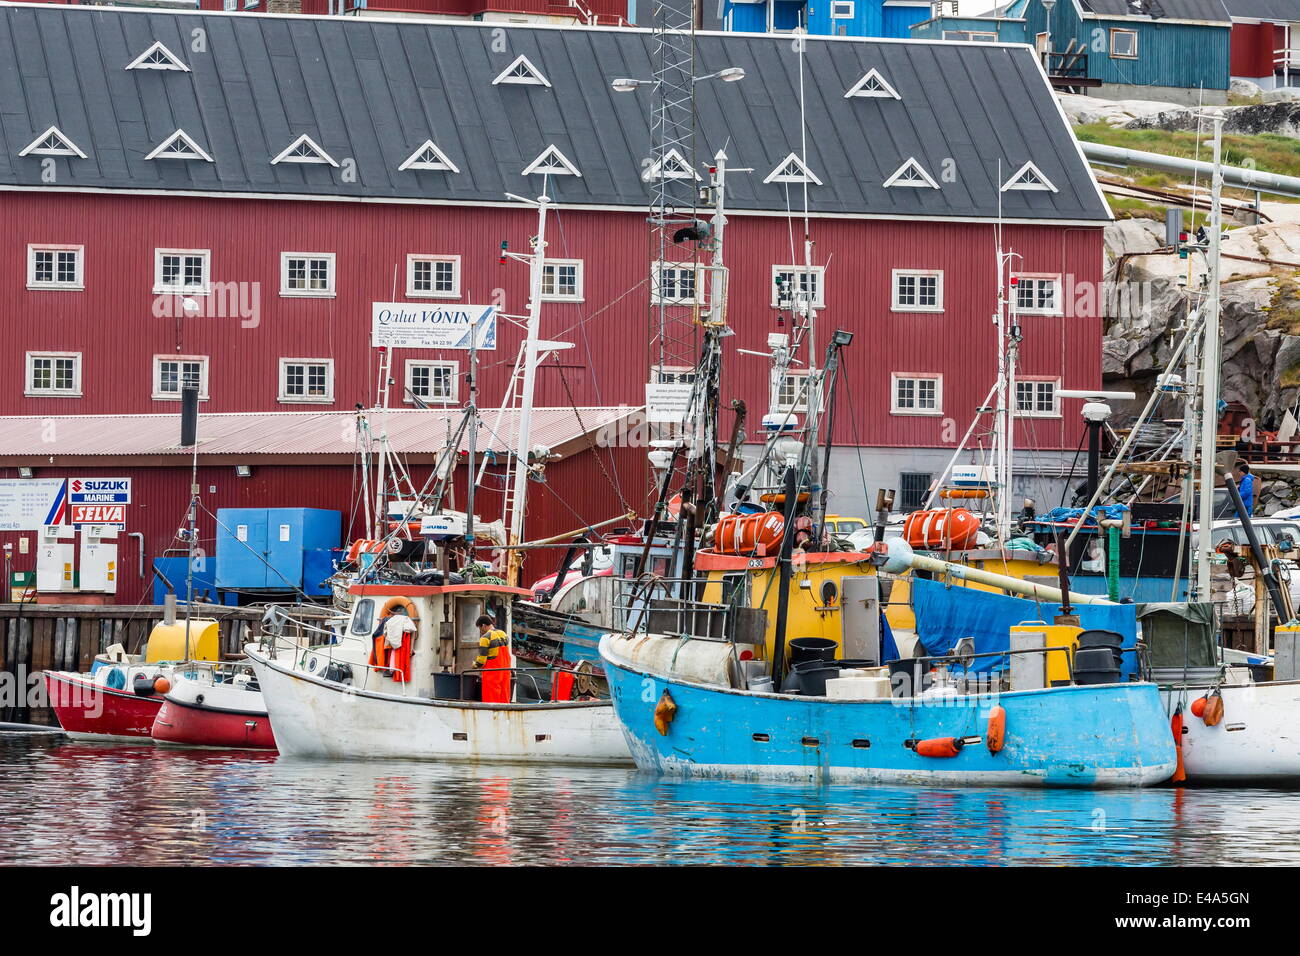 Commercial fishing and whaling boats line the busy inner harbour in the town of Ilulissat, Greenland, Polar Regions Stock Photo